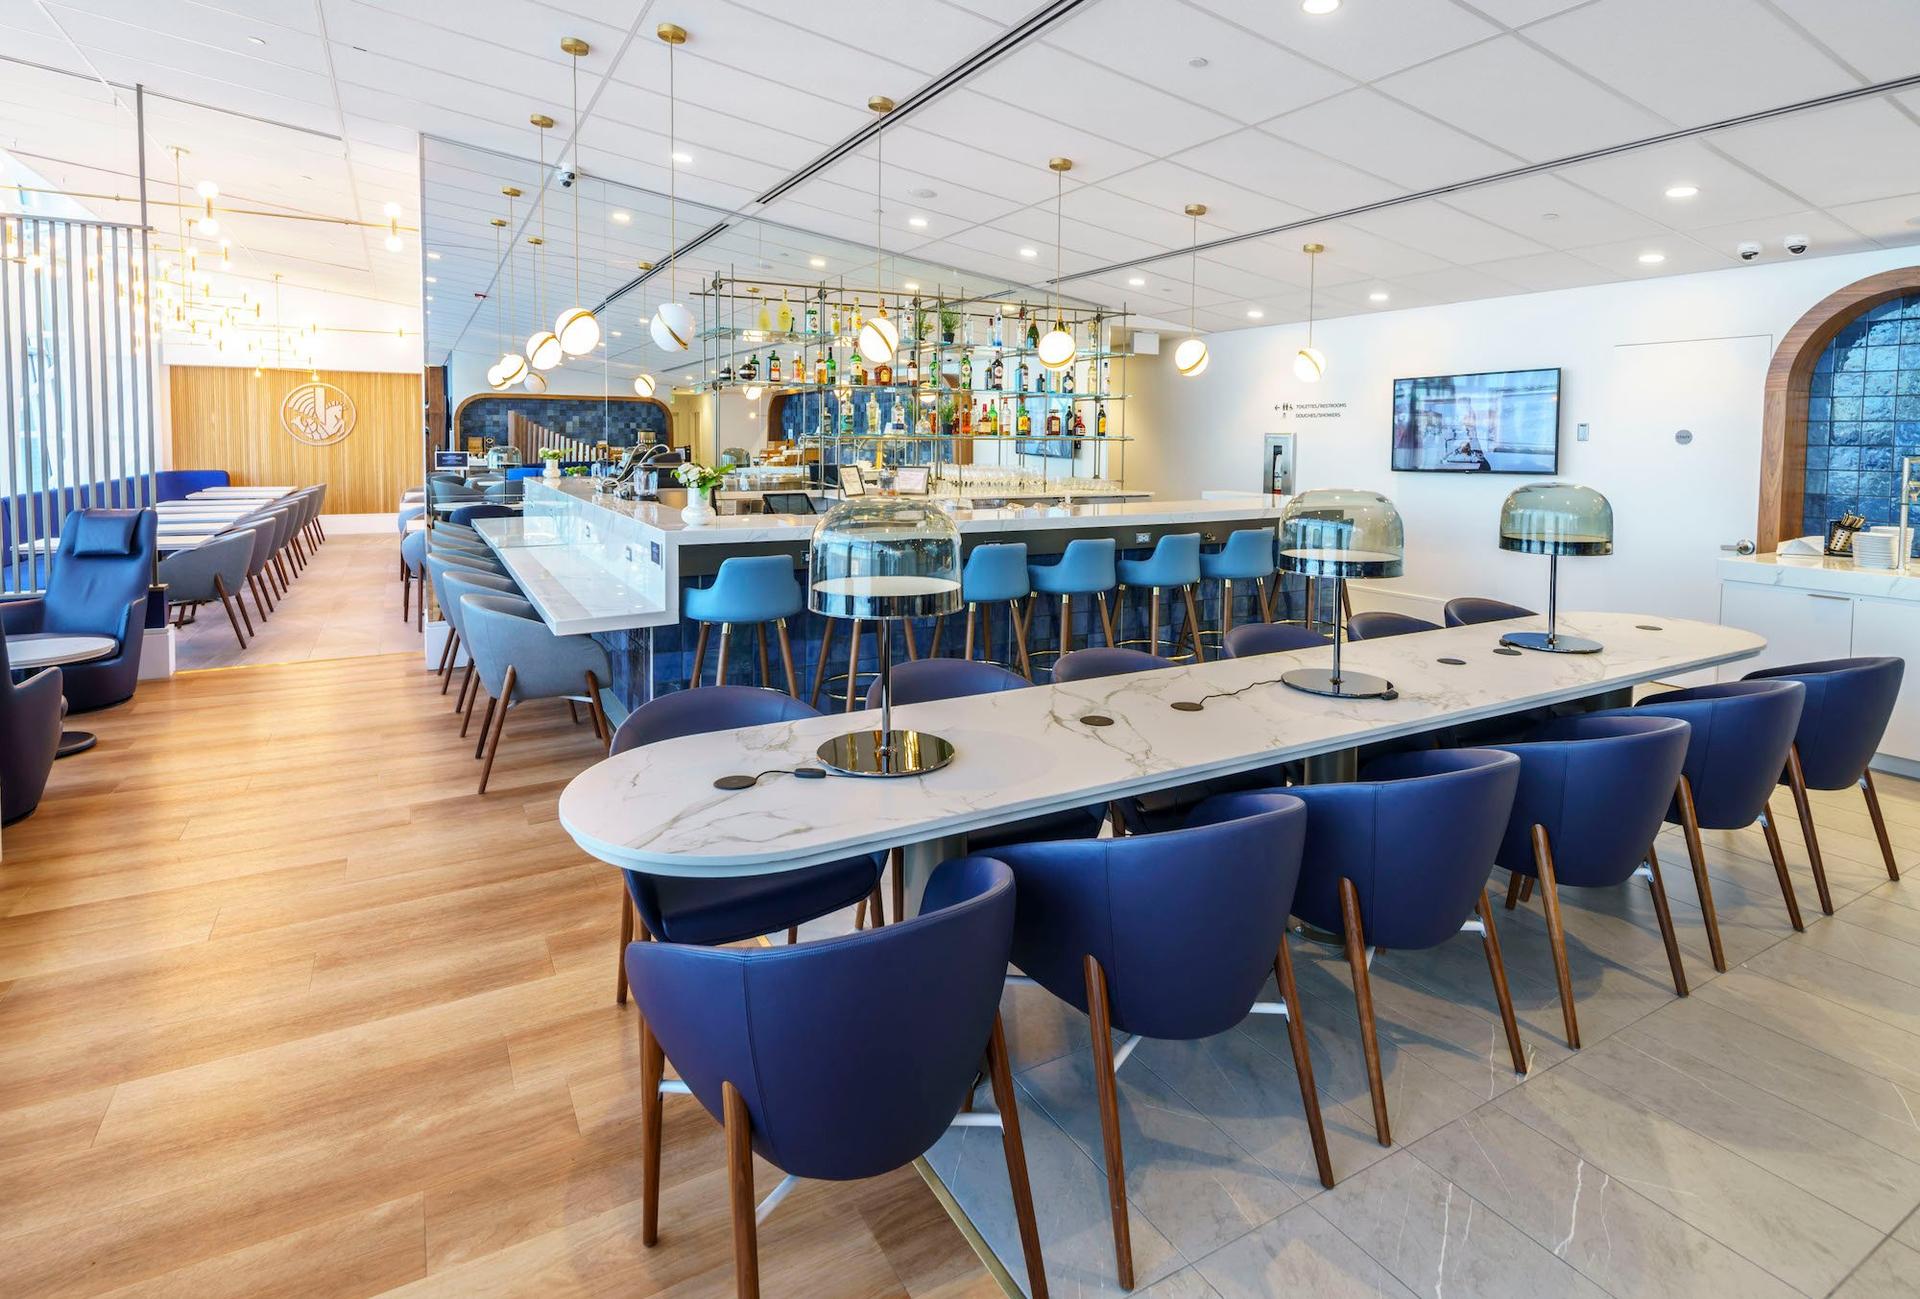 Air France/KLM Lounge operated by Plaza Premium Group image 6 of 10